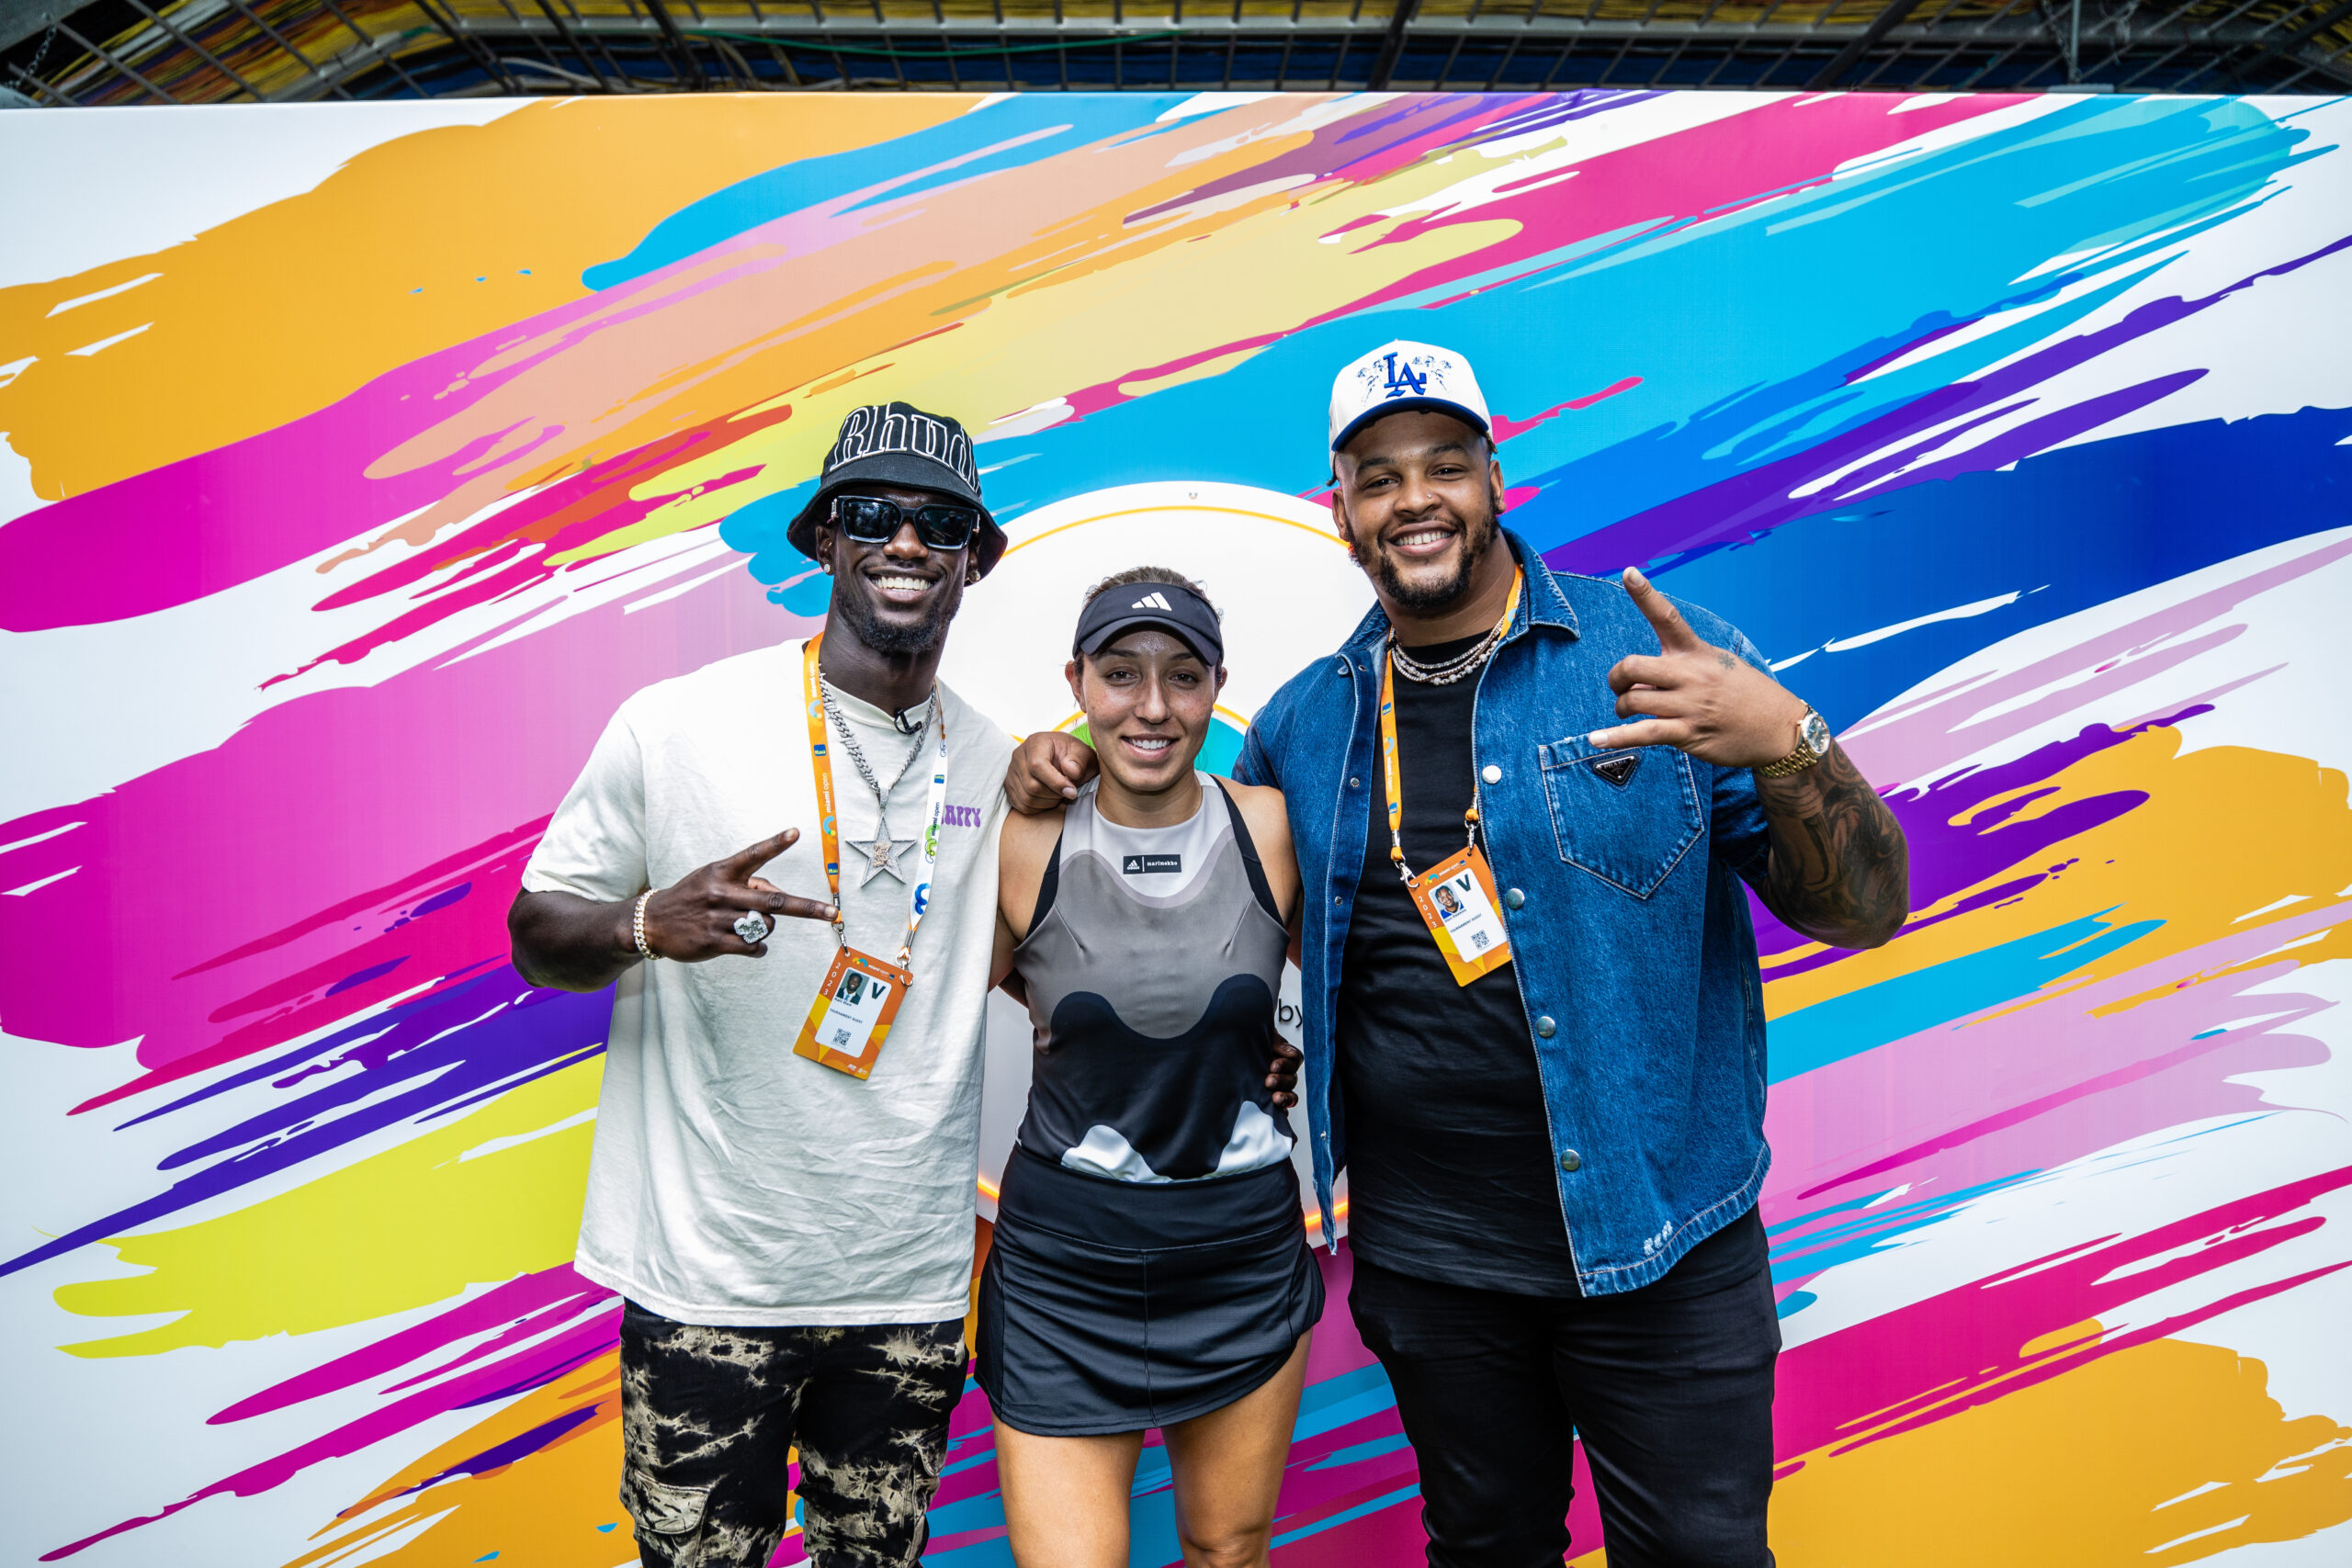 Buffalo Bills players Kaiir Elam (left) and Dion Hawkins with Jessica Pegula at the 2023 Miami Open in Miami Gardens, Fla.